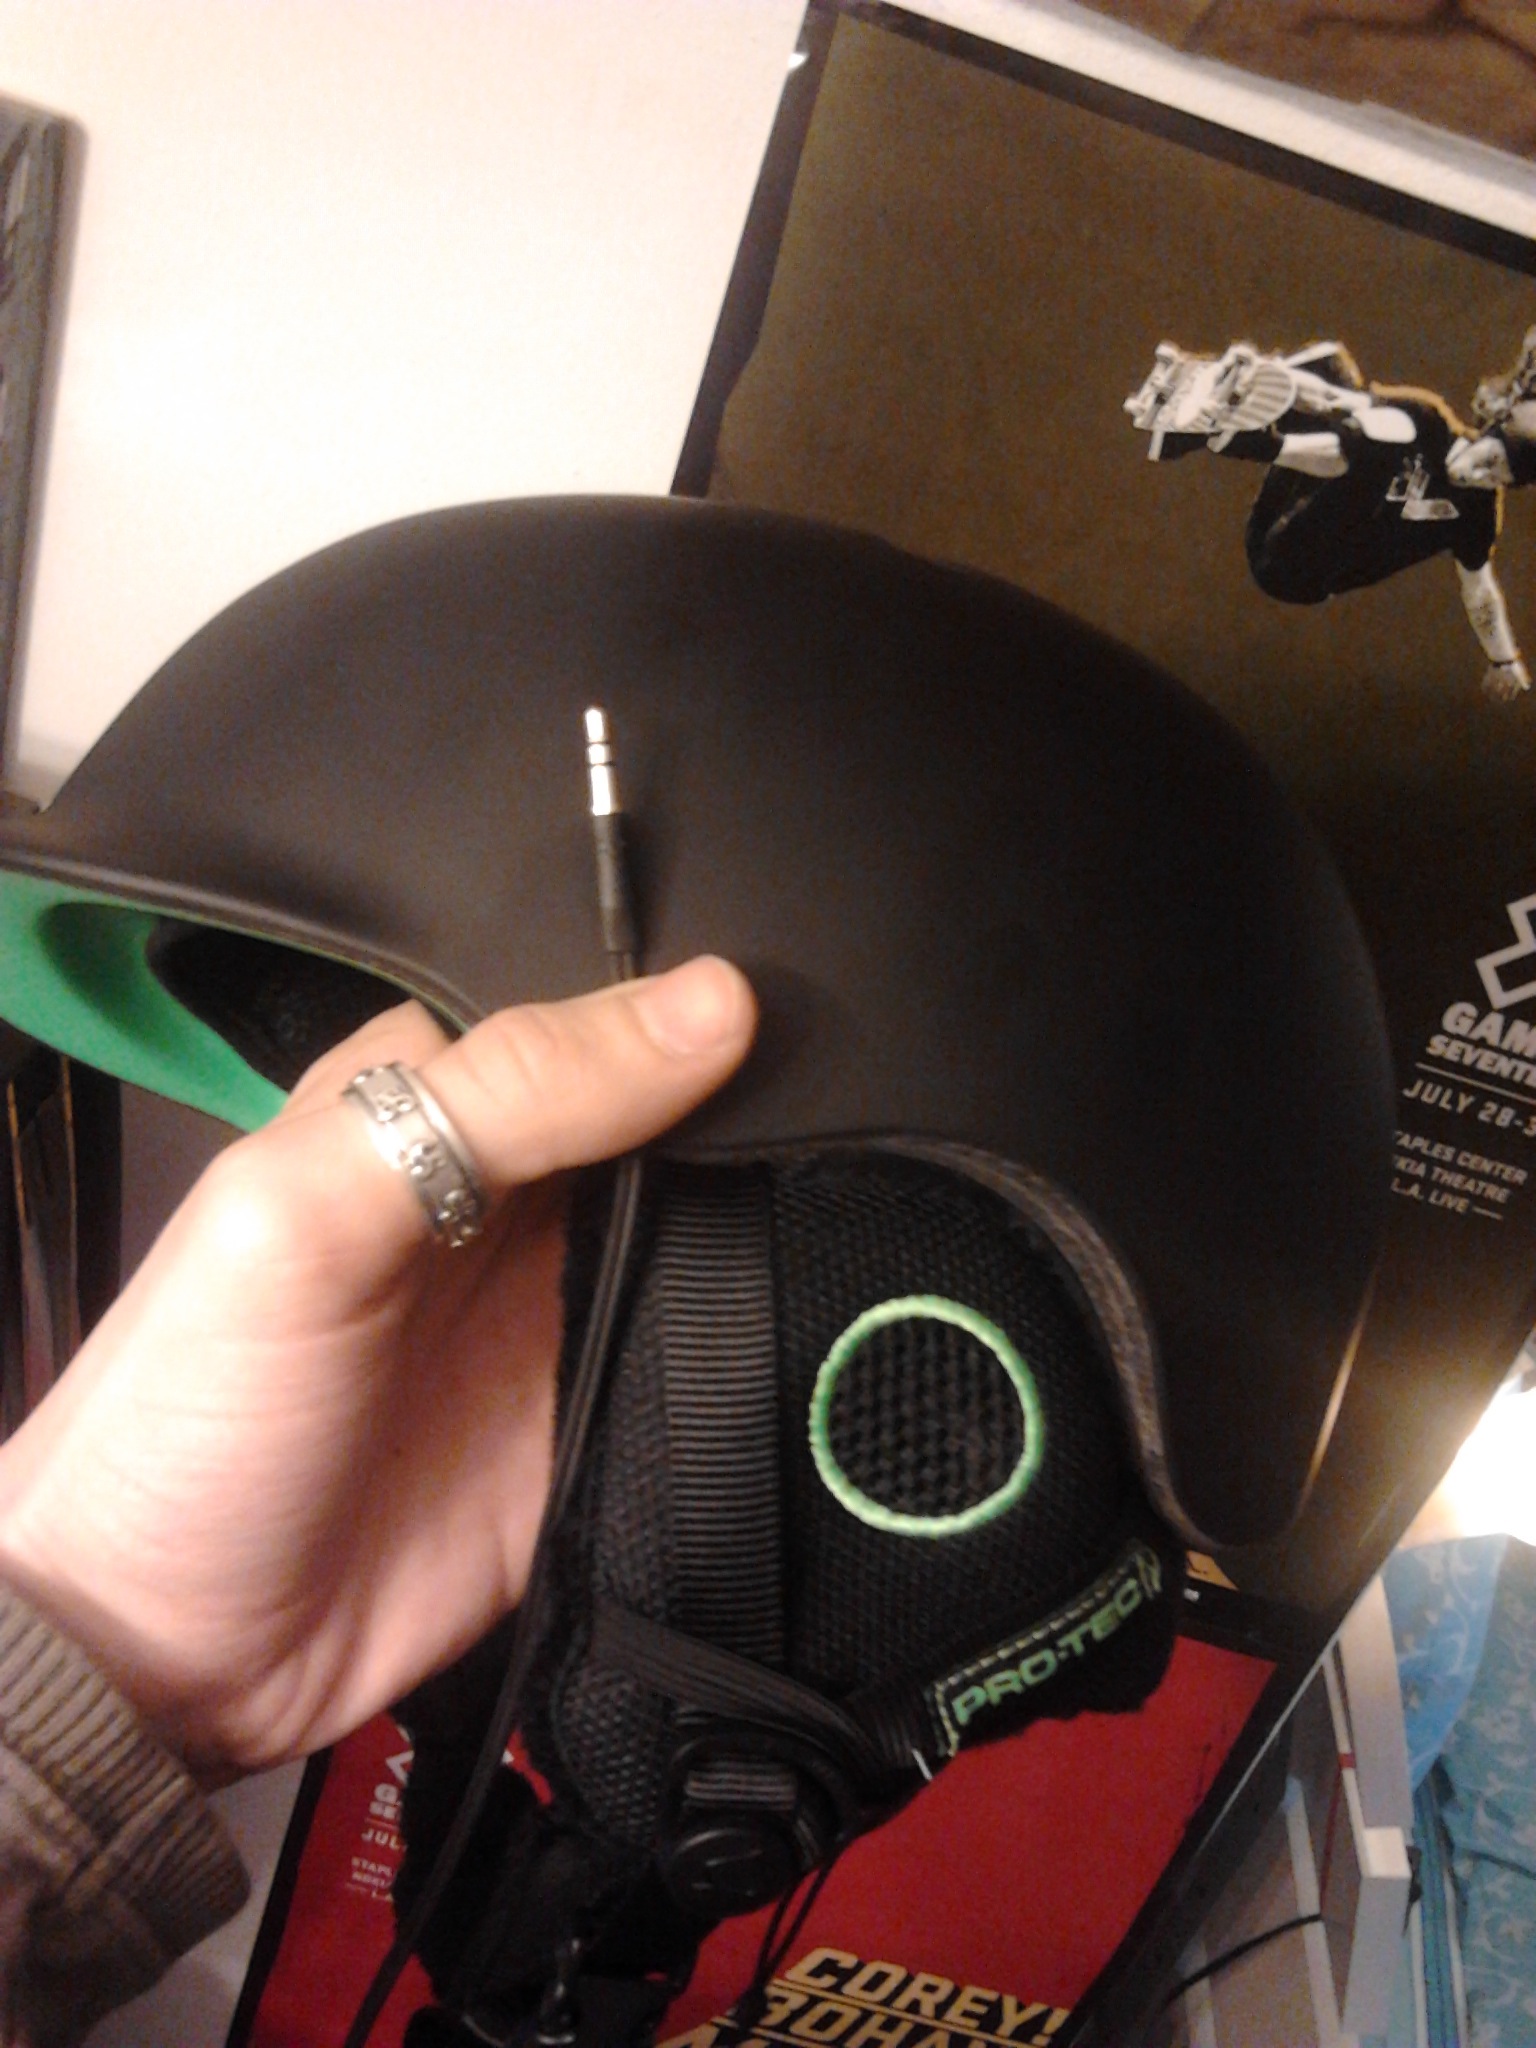 How to create an helmet integrated audio system from a normal pair of headphones